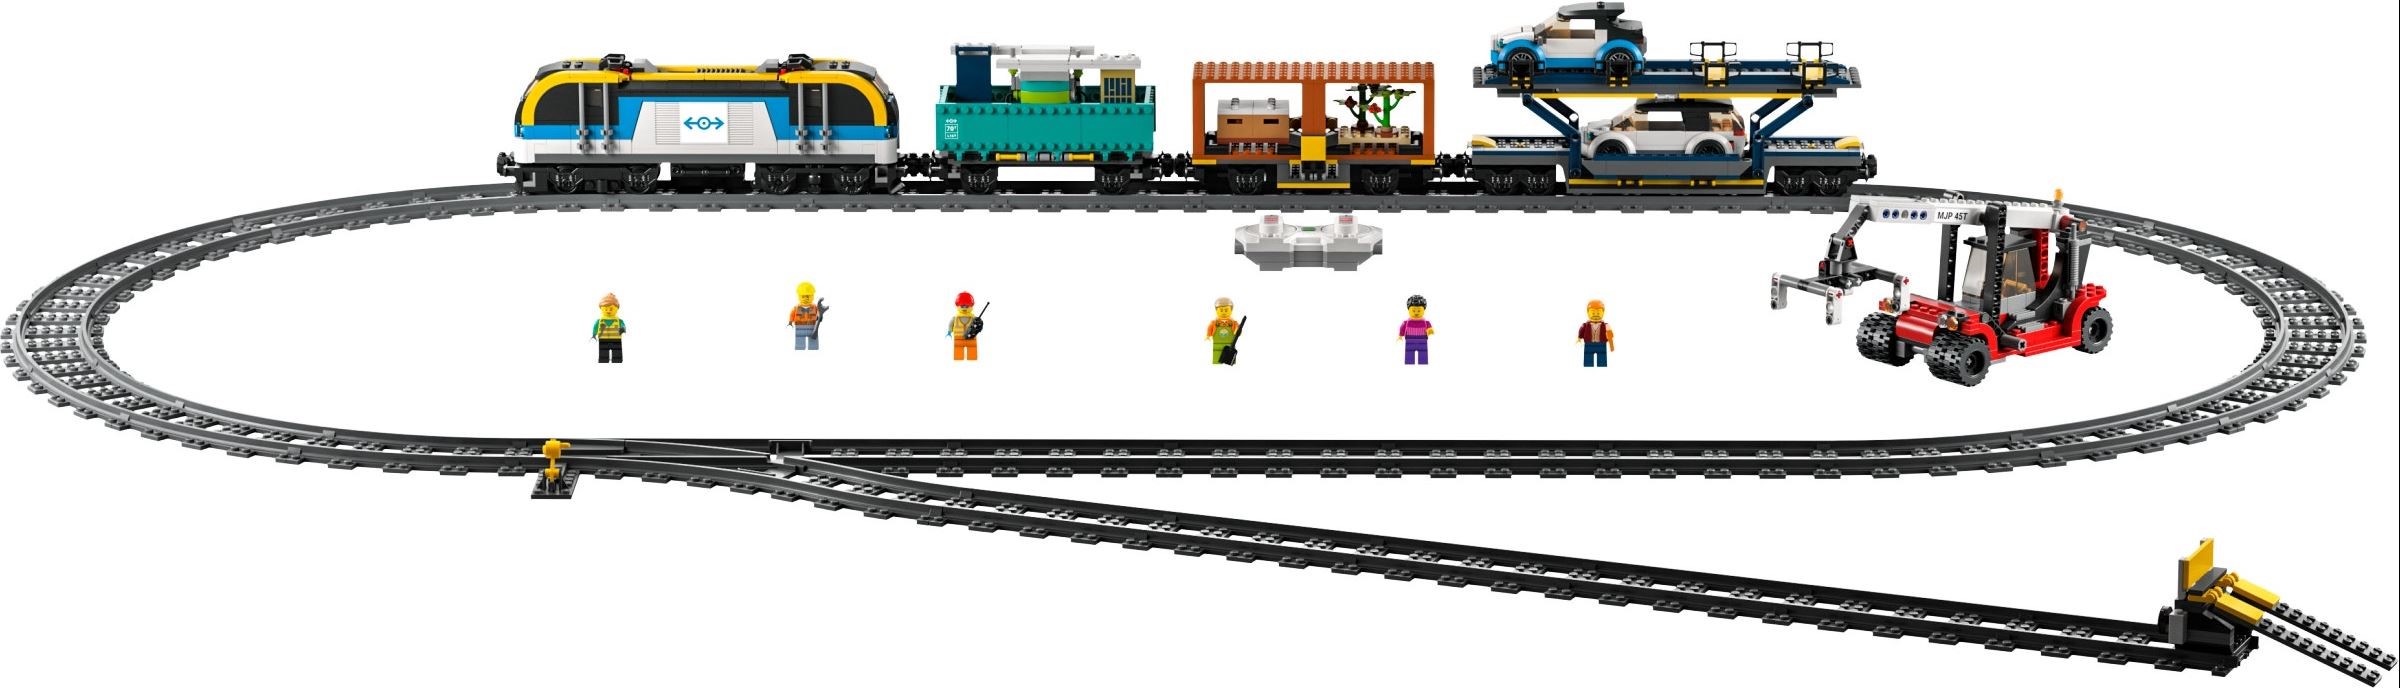 New photos of the 2018 LEGO City Trains sets 60197 and 60198